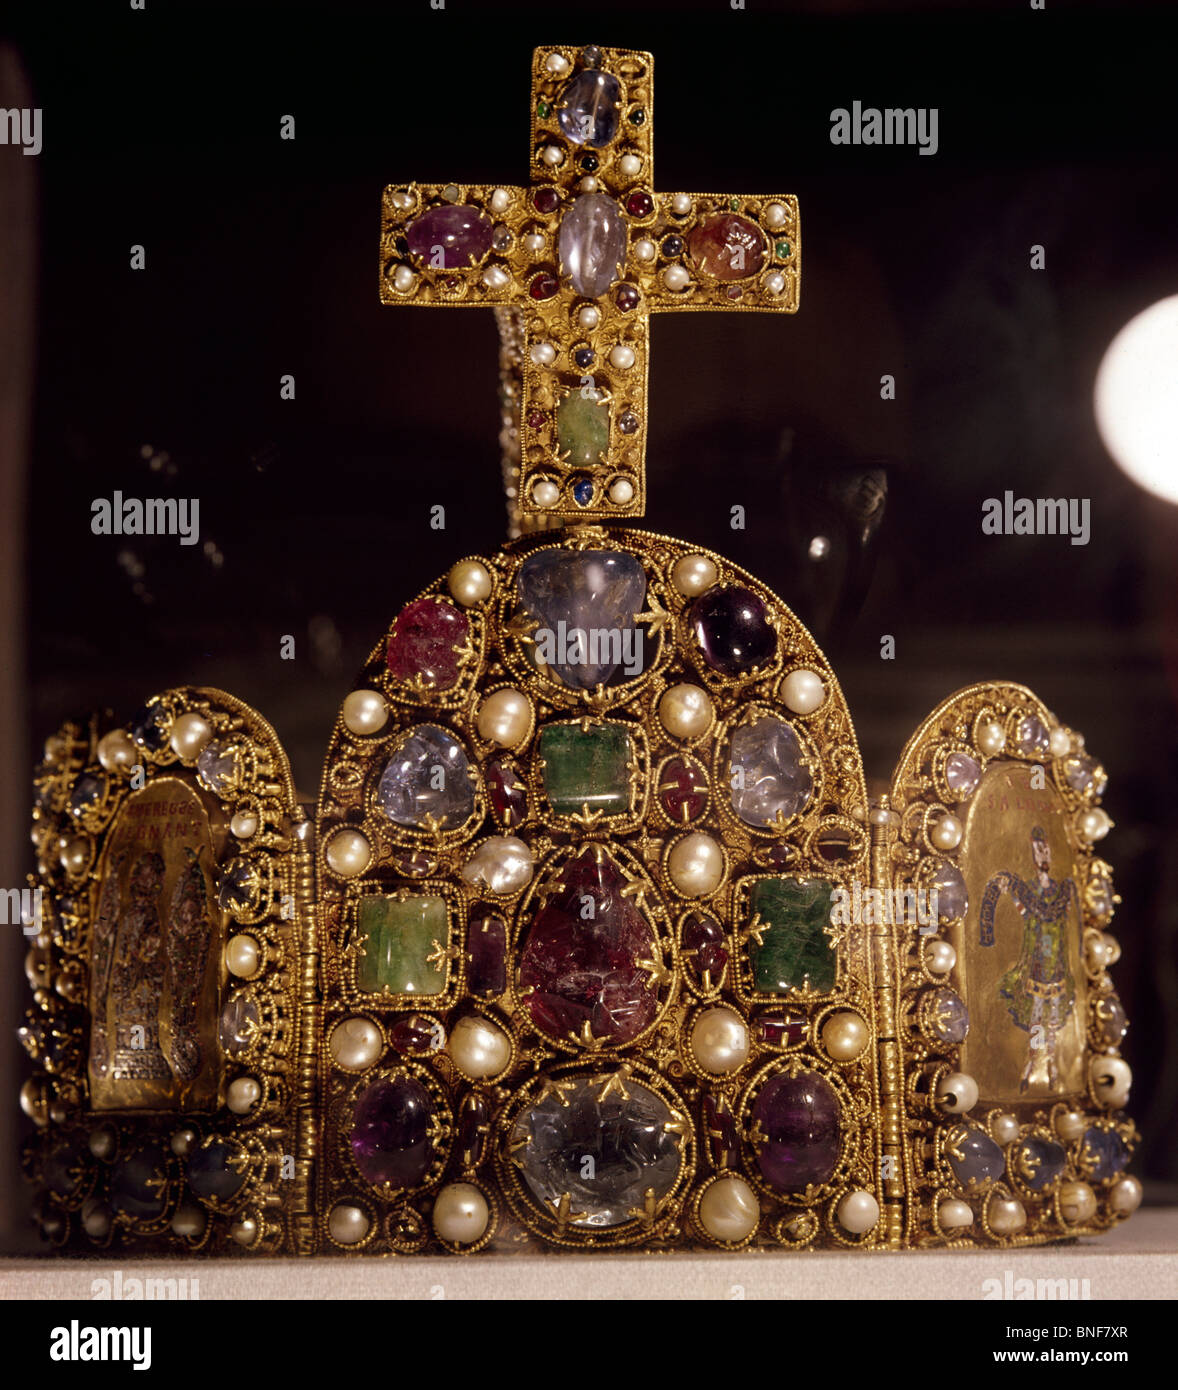 Crown Jewels of The Holy Roman Empire  Antiques-Jewelry Stock Photo